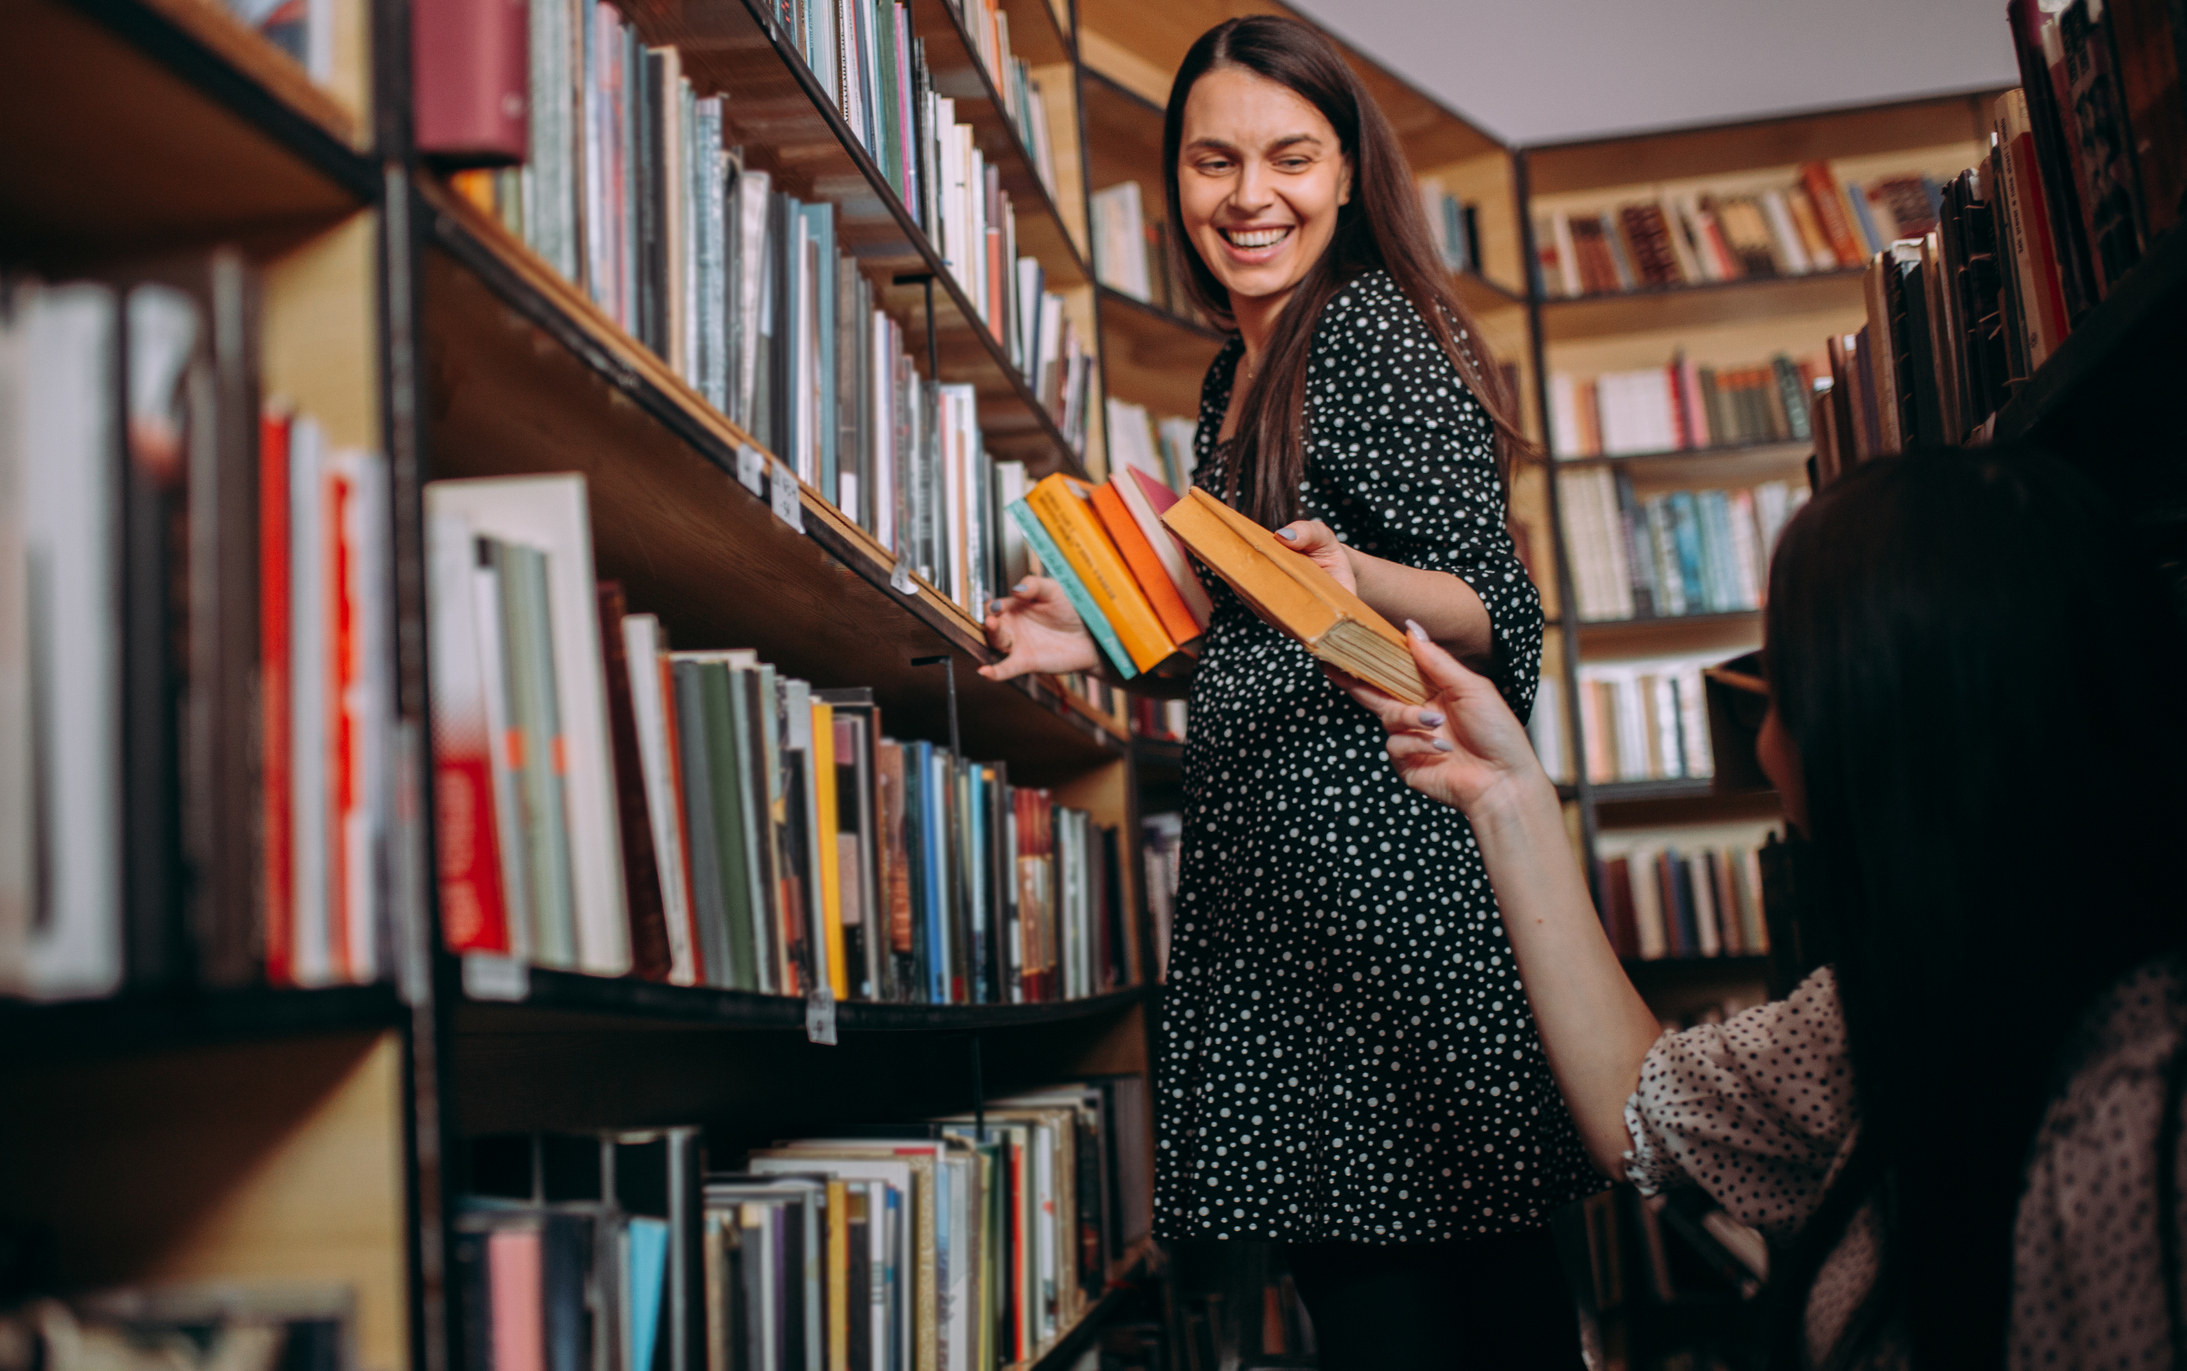 A librarian hands a book from a shelf to a patron